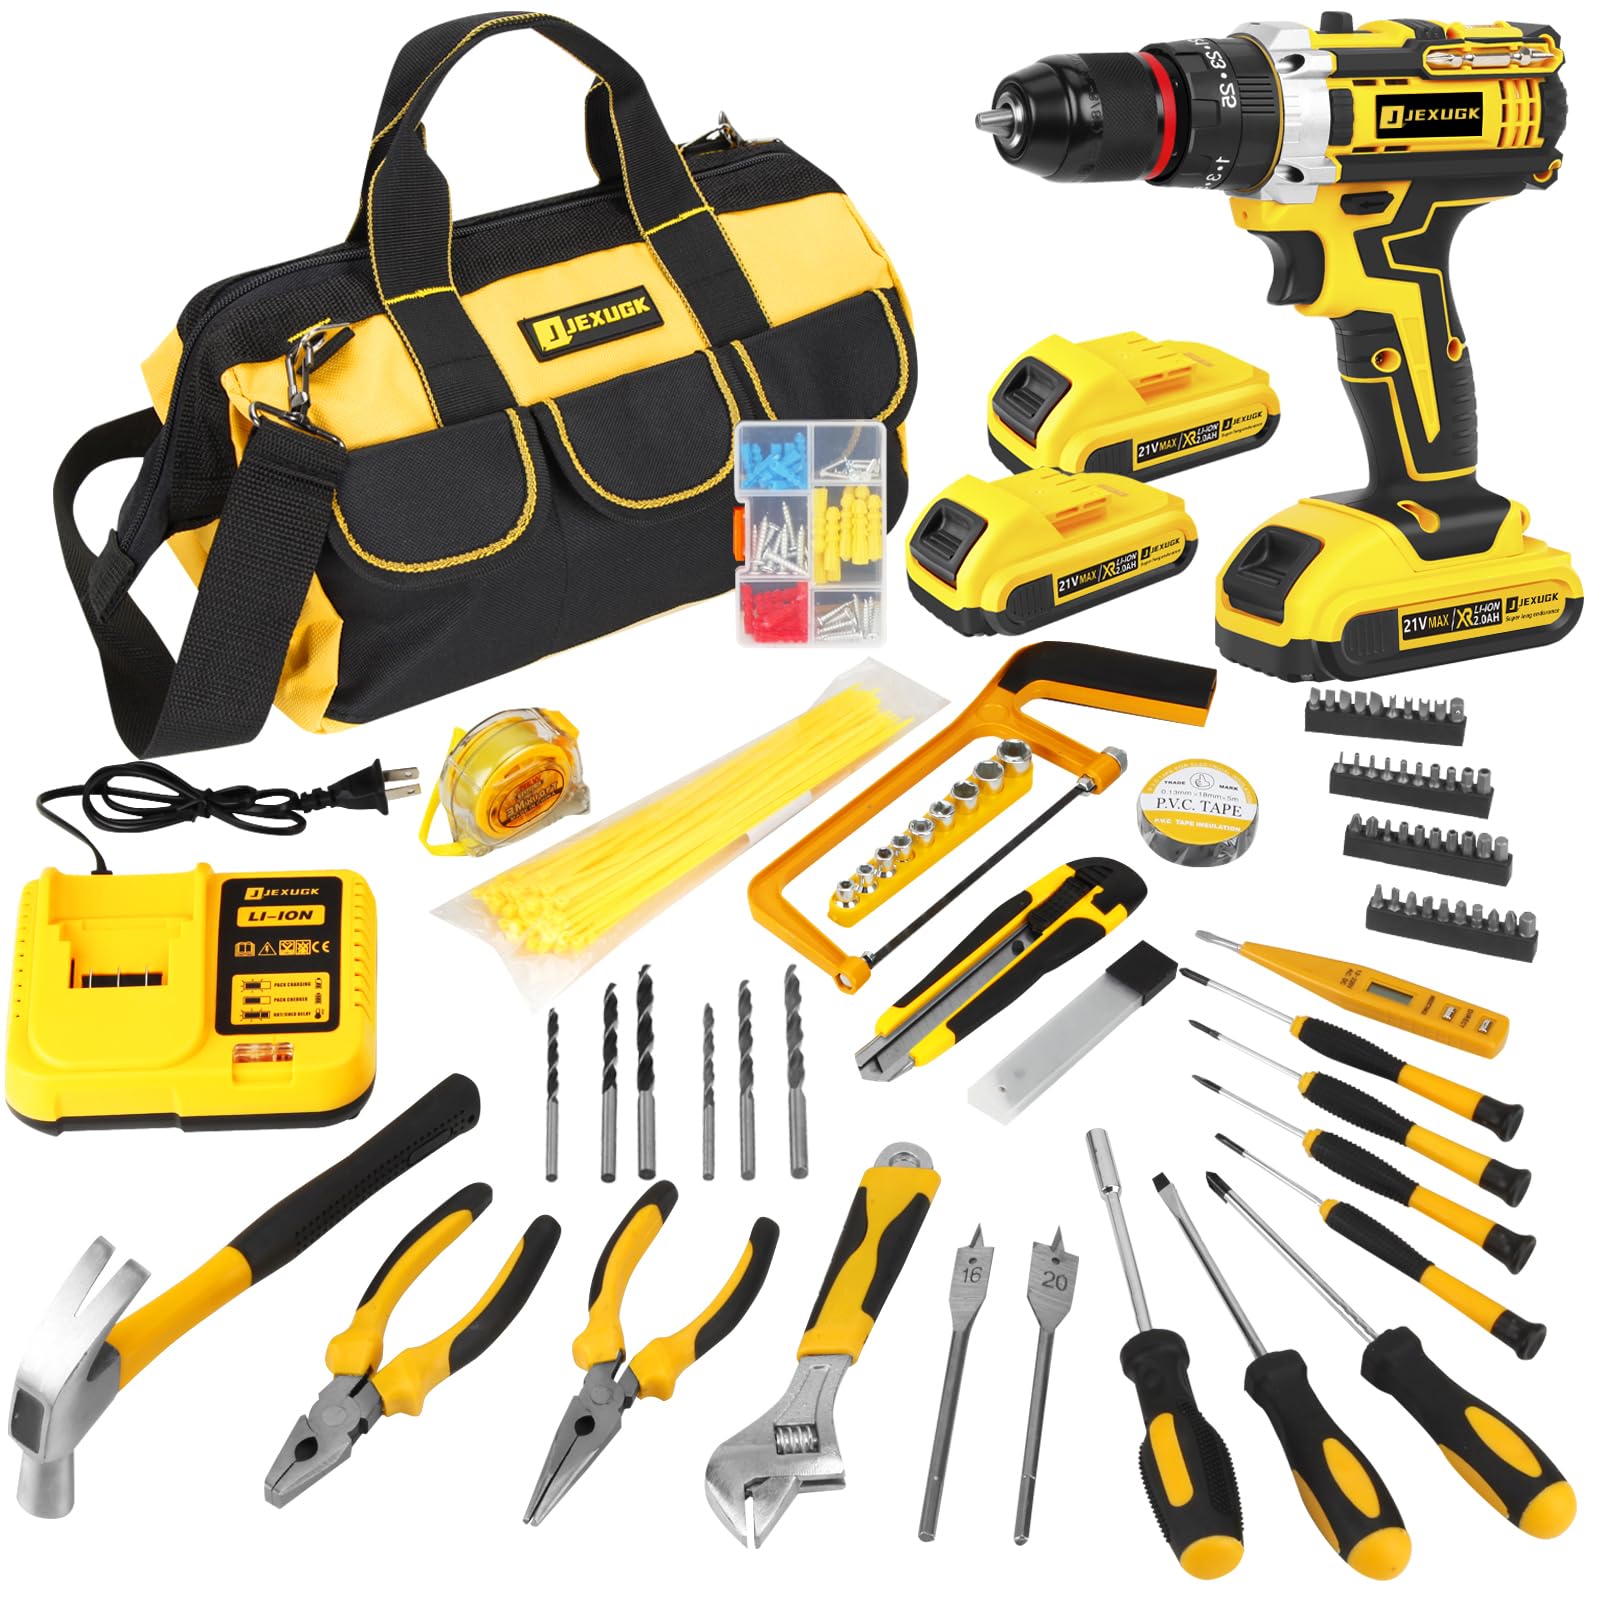 JEXUGK Home Tool Set with Power Drill, 245PCS Cordless Drill Set with 21V Battery Drill Driver